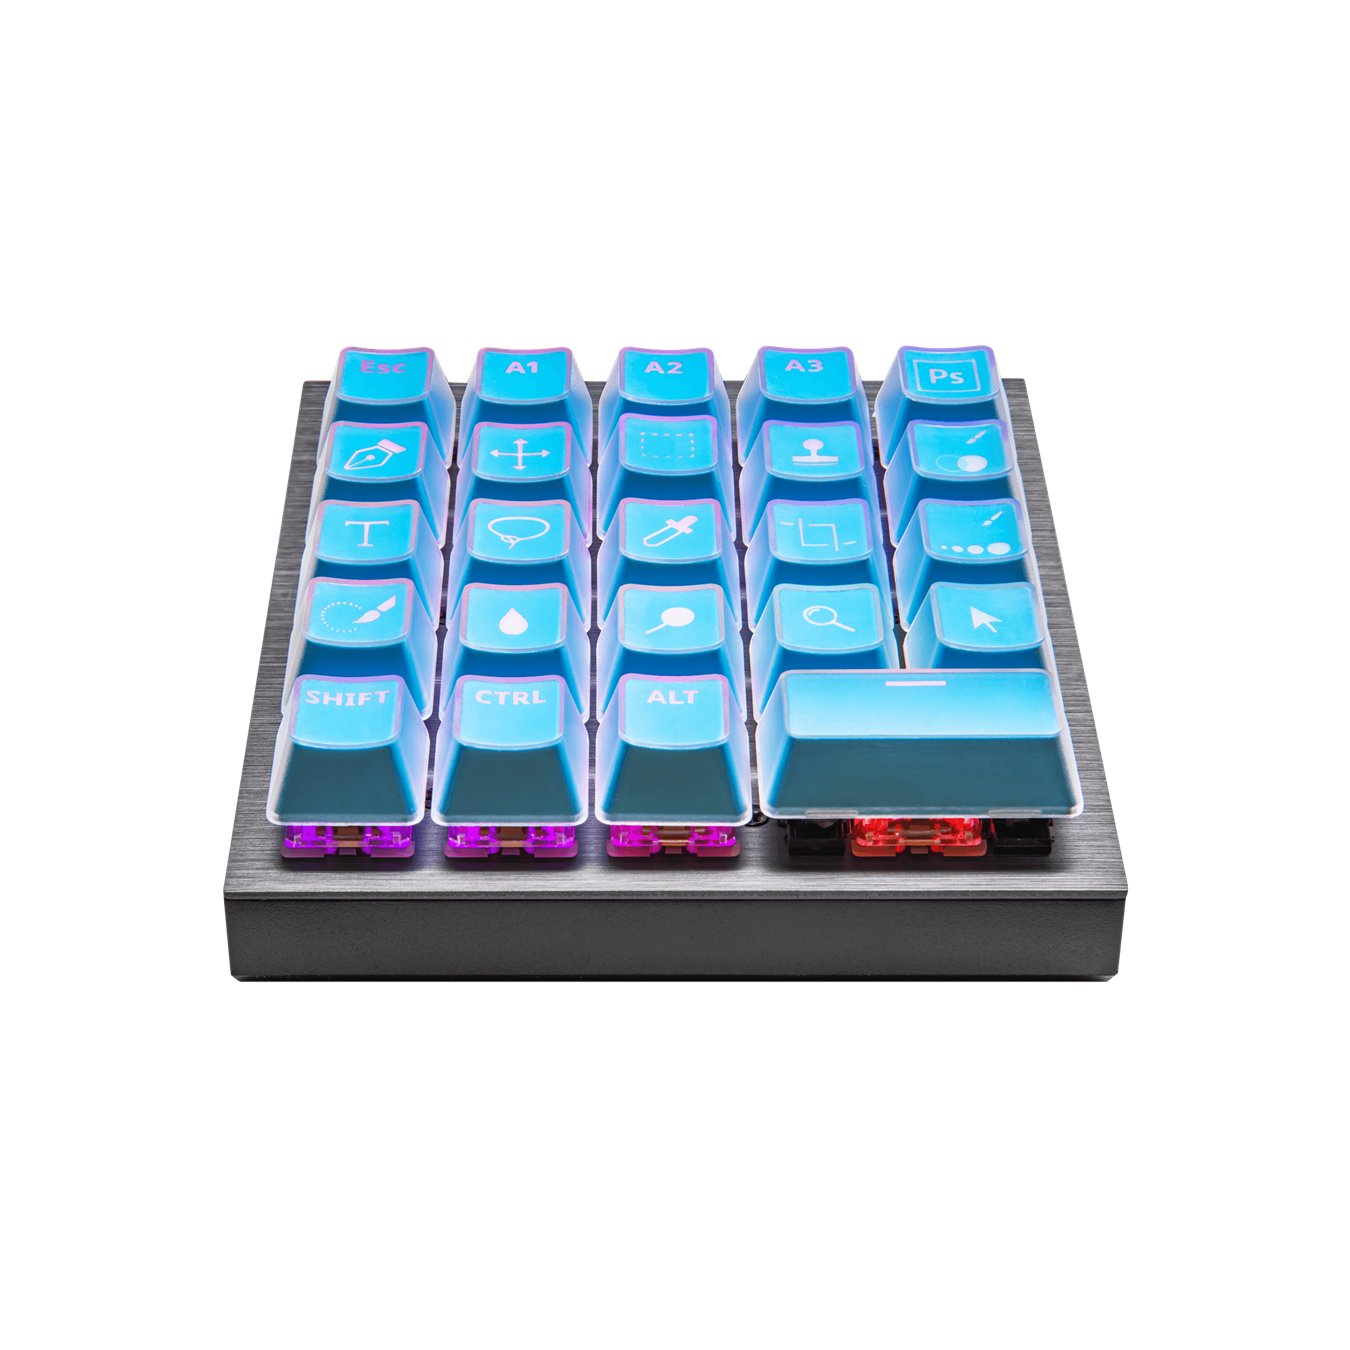 Control Pad Extra Keycap Sets - Photoshop Set - Front View